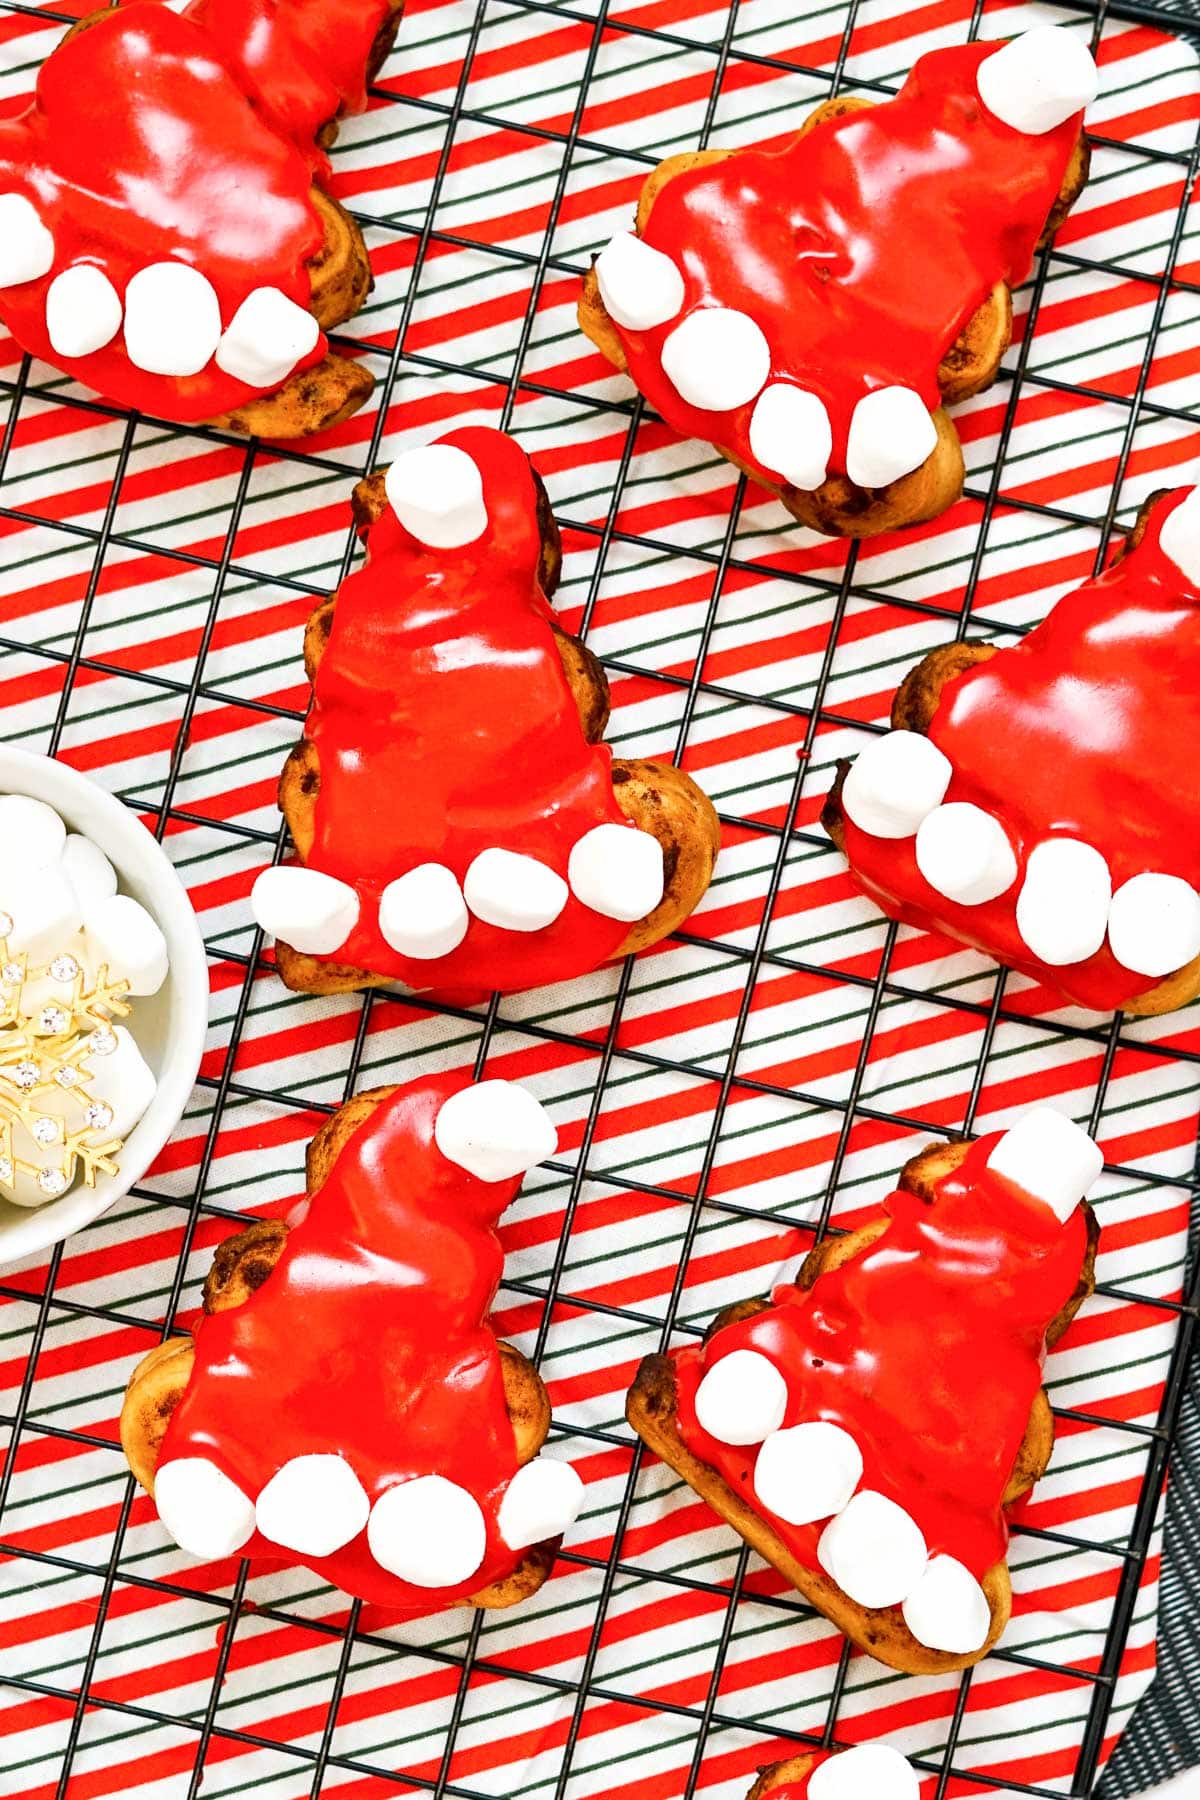 Cinnamon rolls decorated to look like Santa hats with red icing and mini marshmallows on a wire rack with a red striped towel.